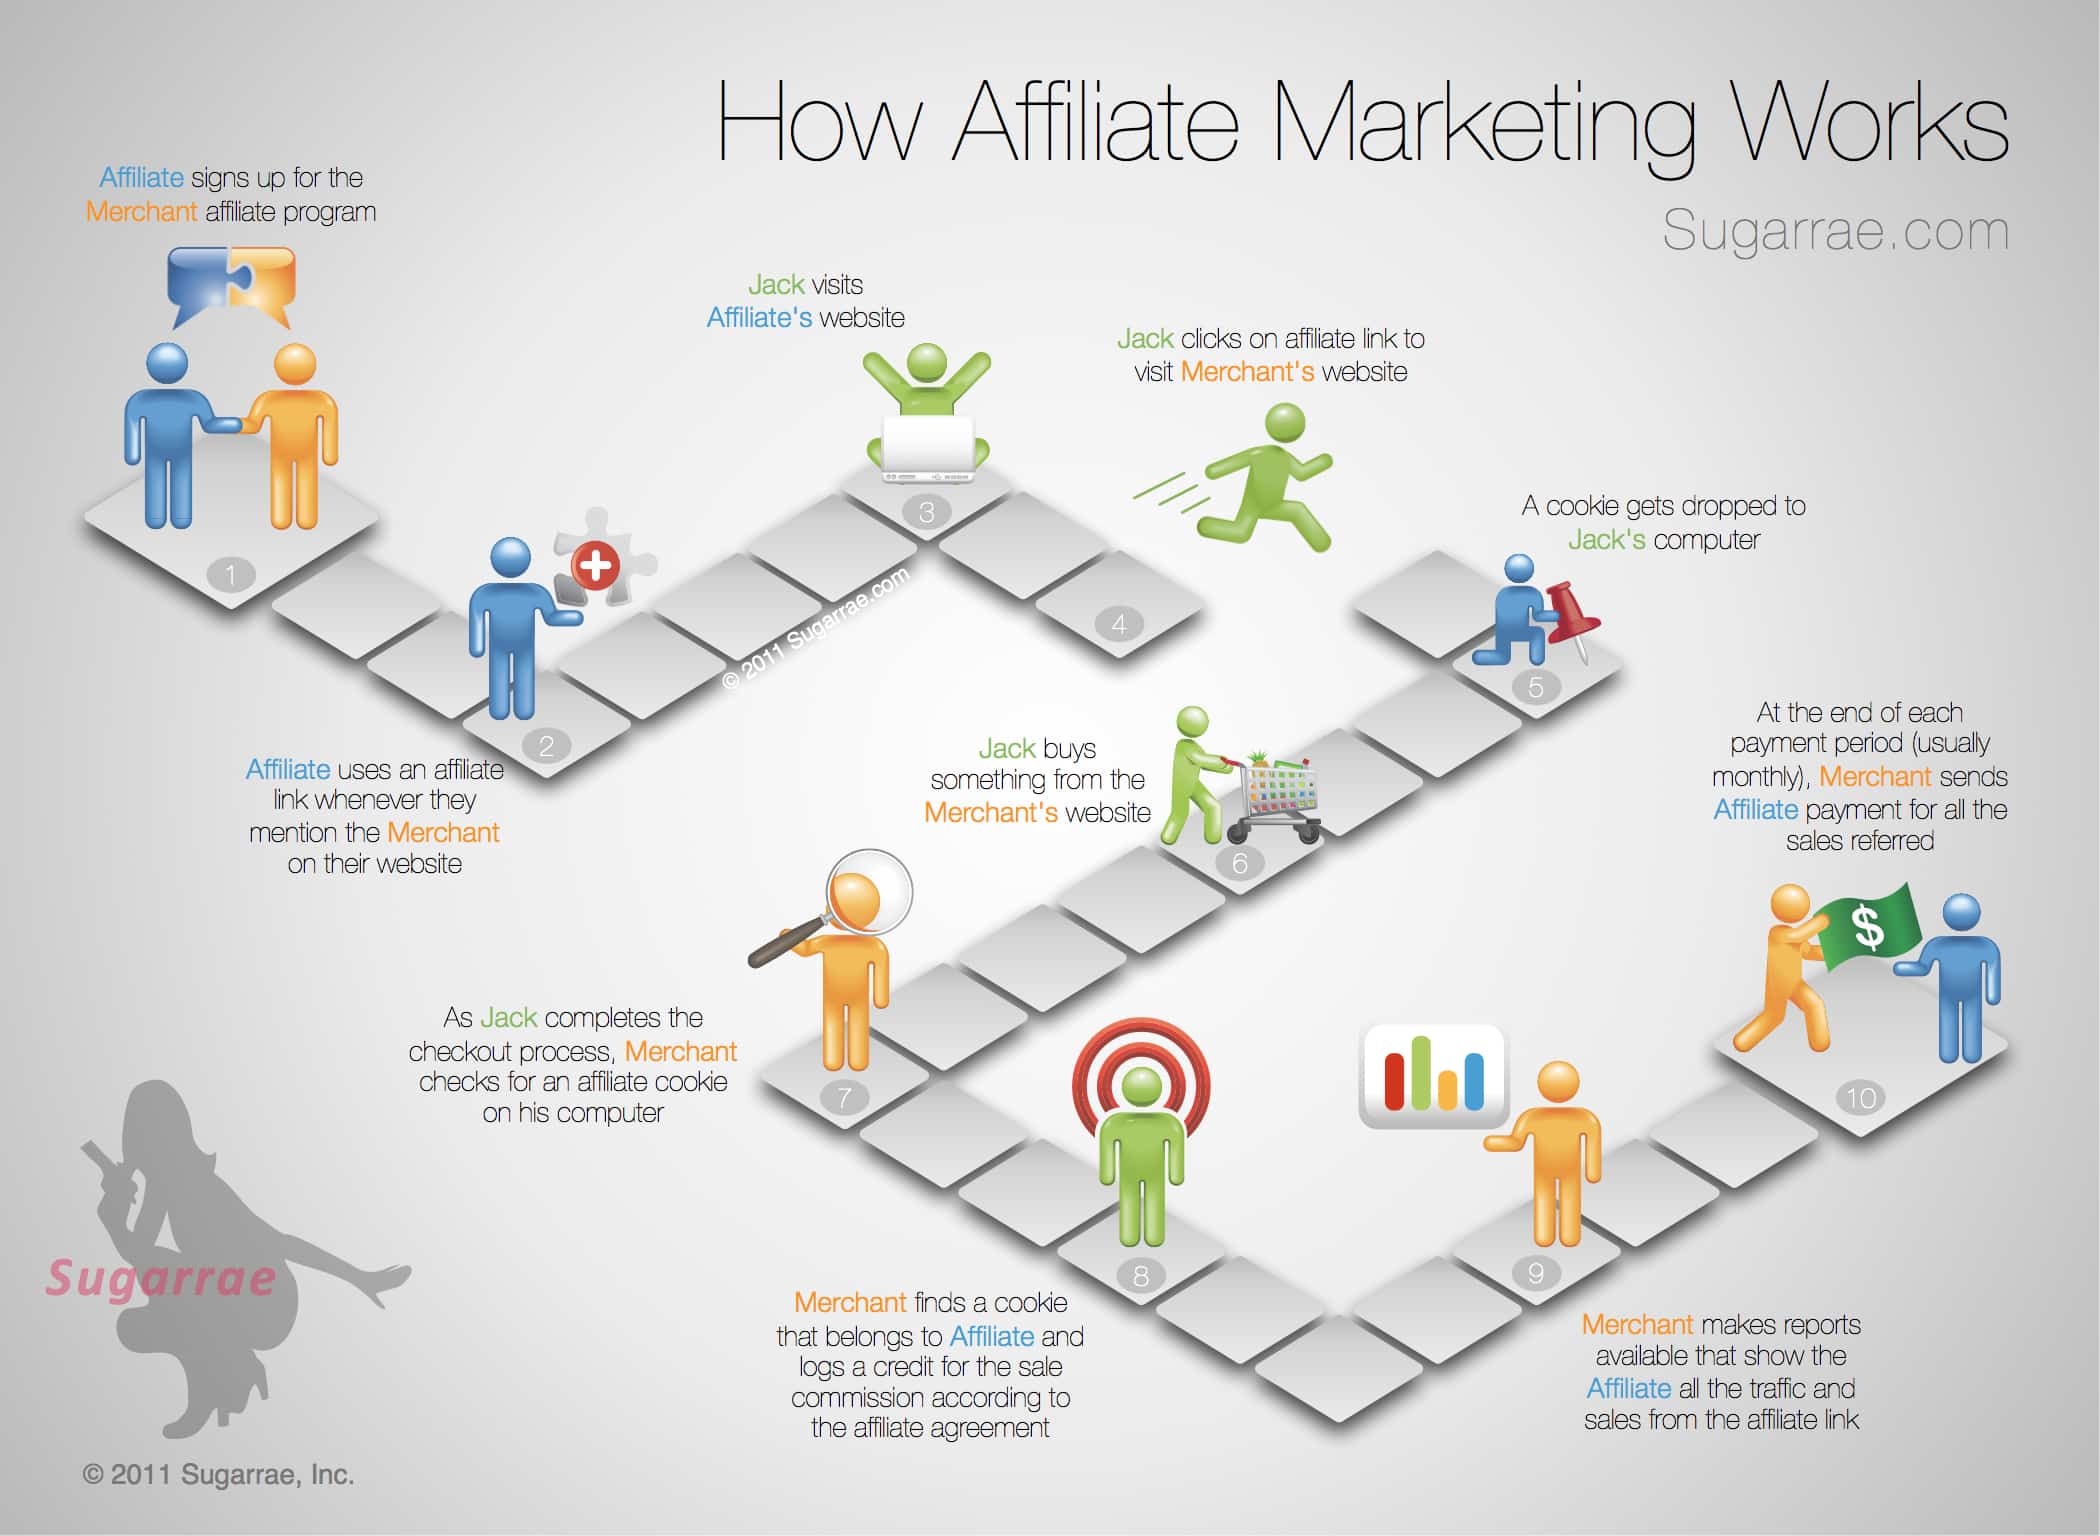 How Affiliate Marketing works infographic? Source:  Sugarrae